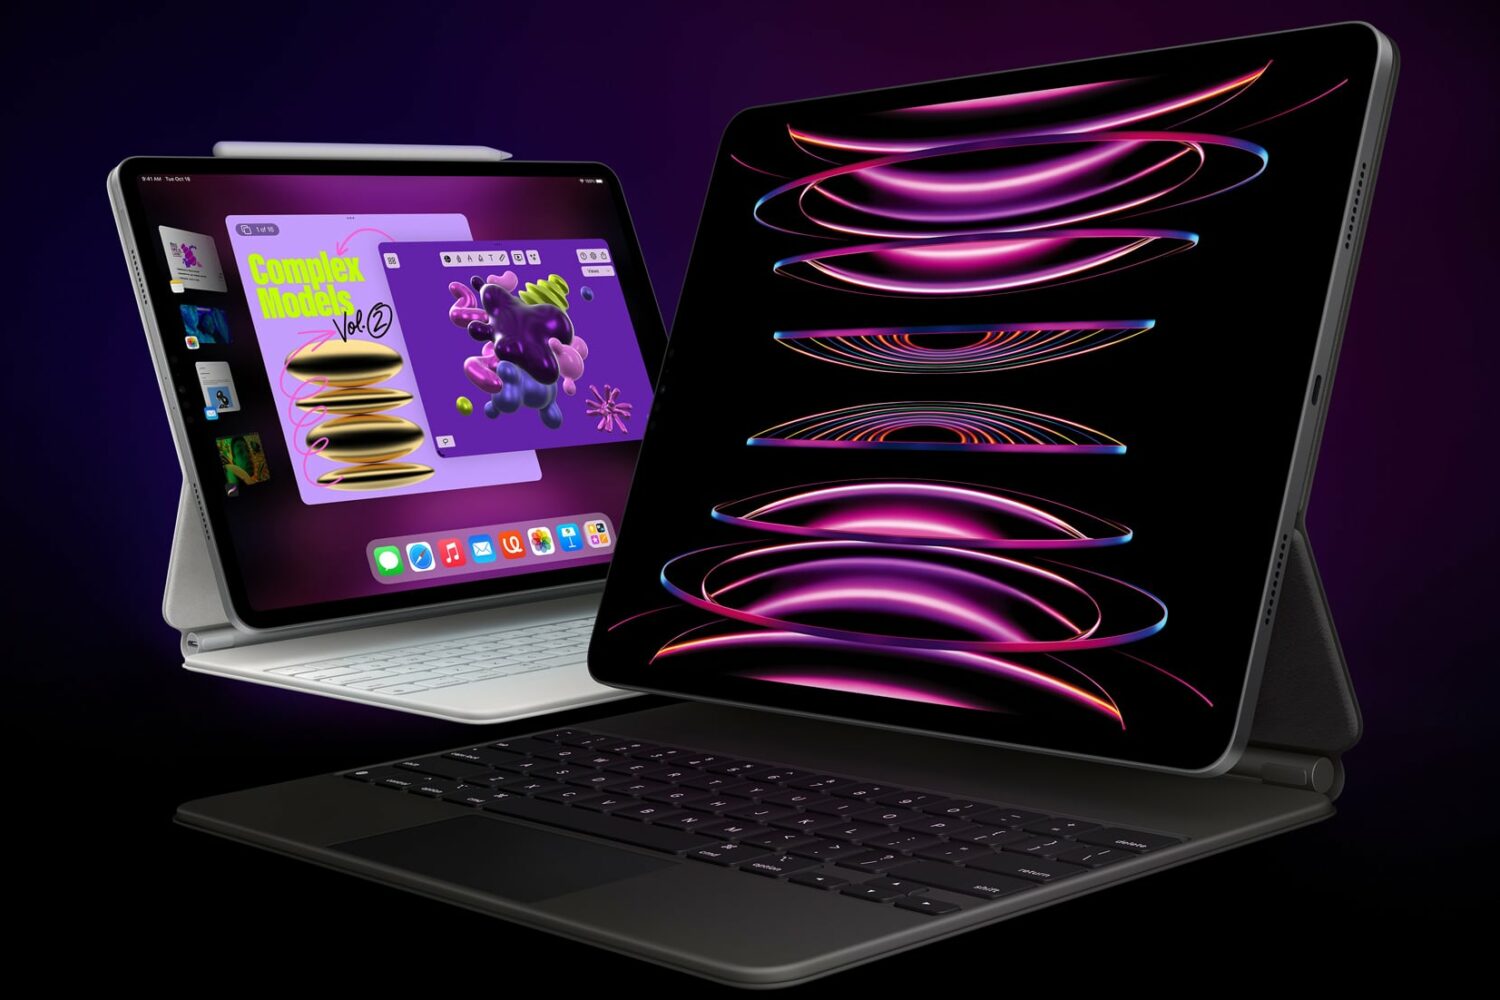 11-inch and 12.9-inch M2 iPad Pro with Apple's Magic Keyboard, set agains a dark background